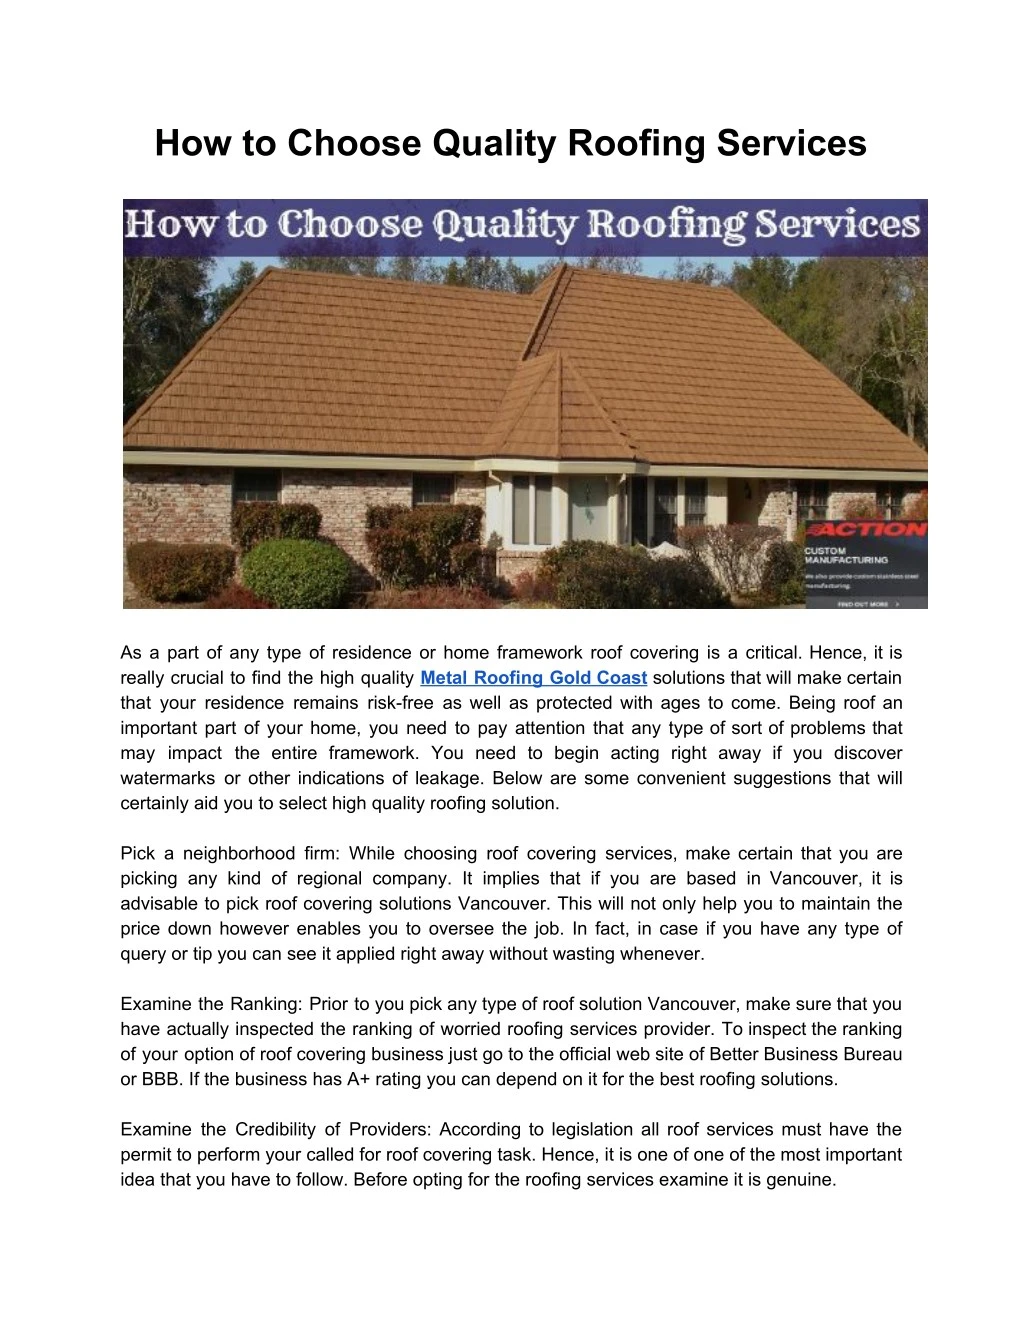 how to choose quality roofing services